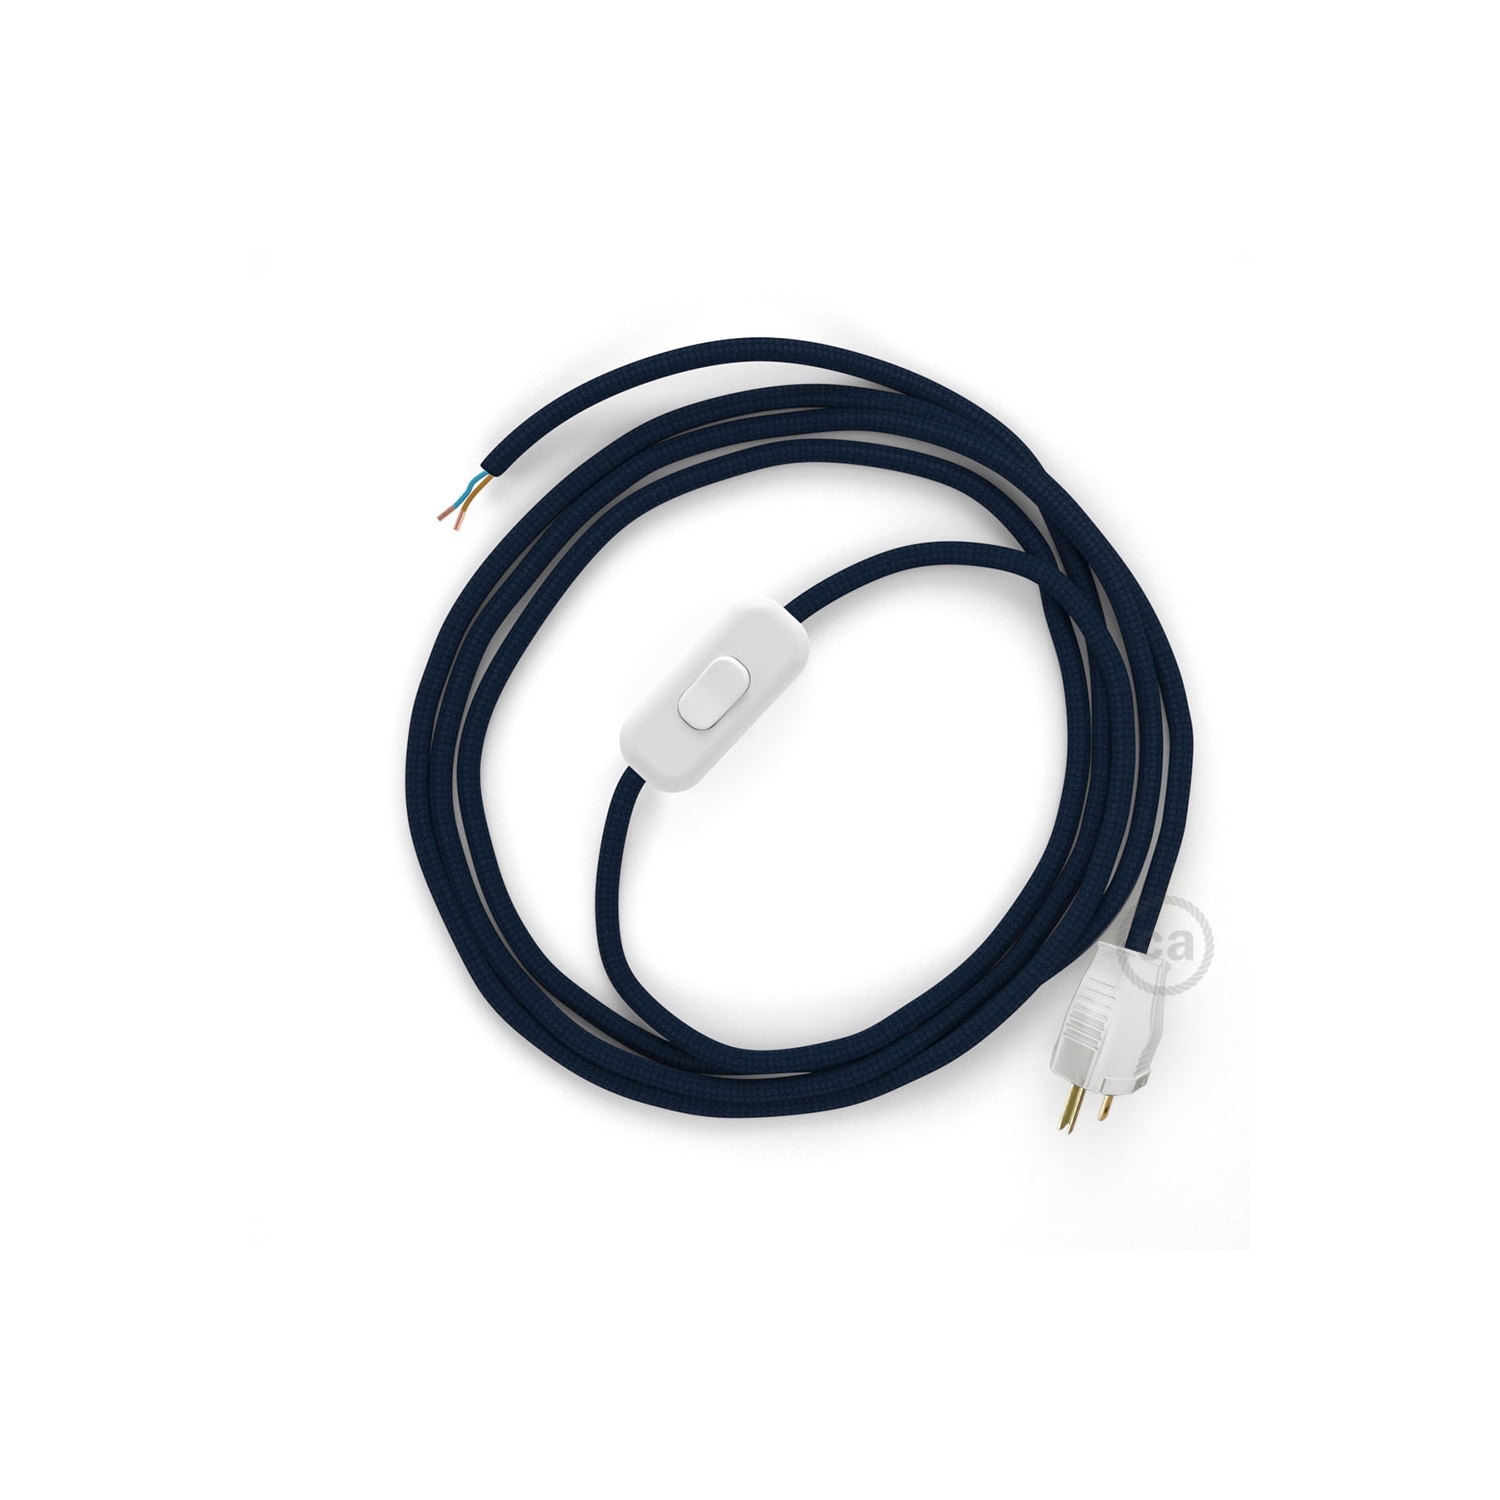 Power Cord with in-line switch, RM20 Dark Blue Rayon - Choose color of switch/plug